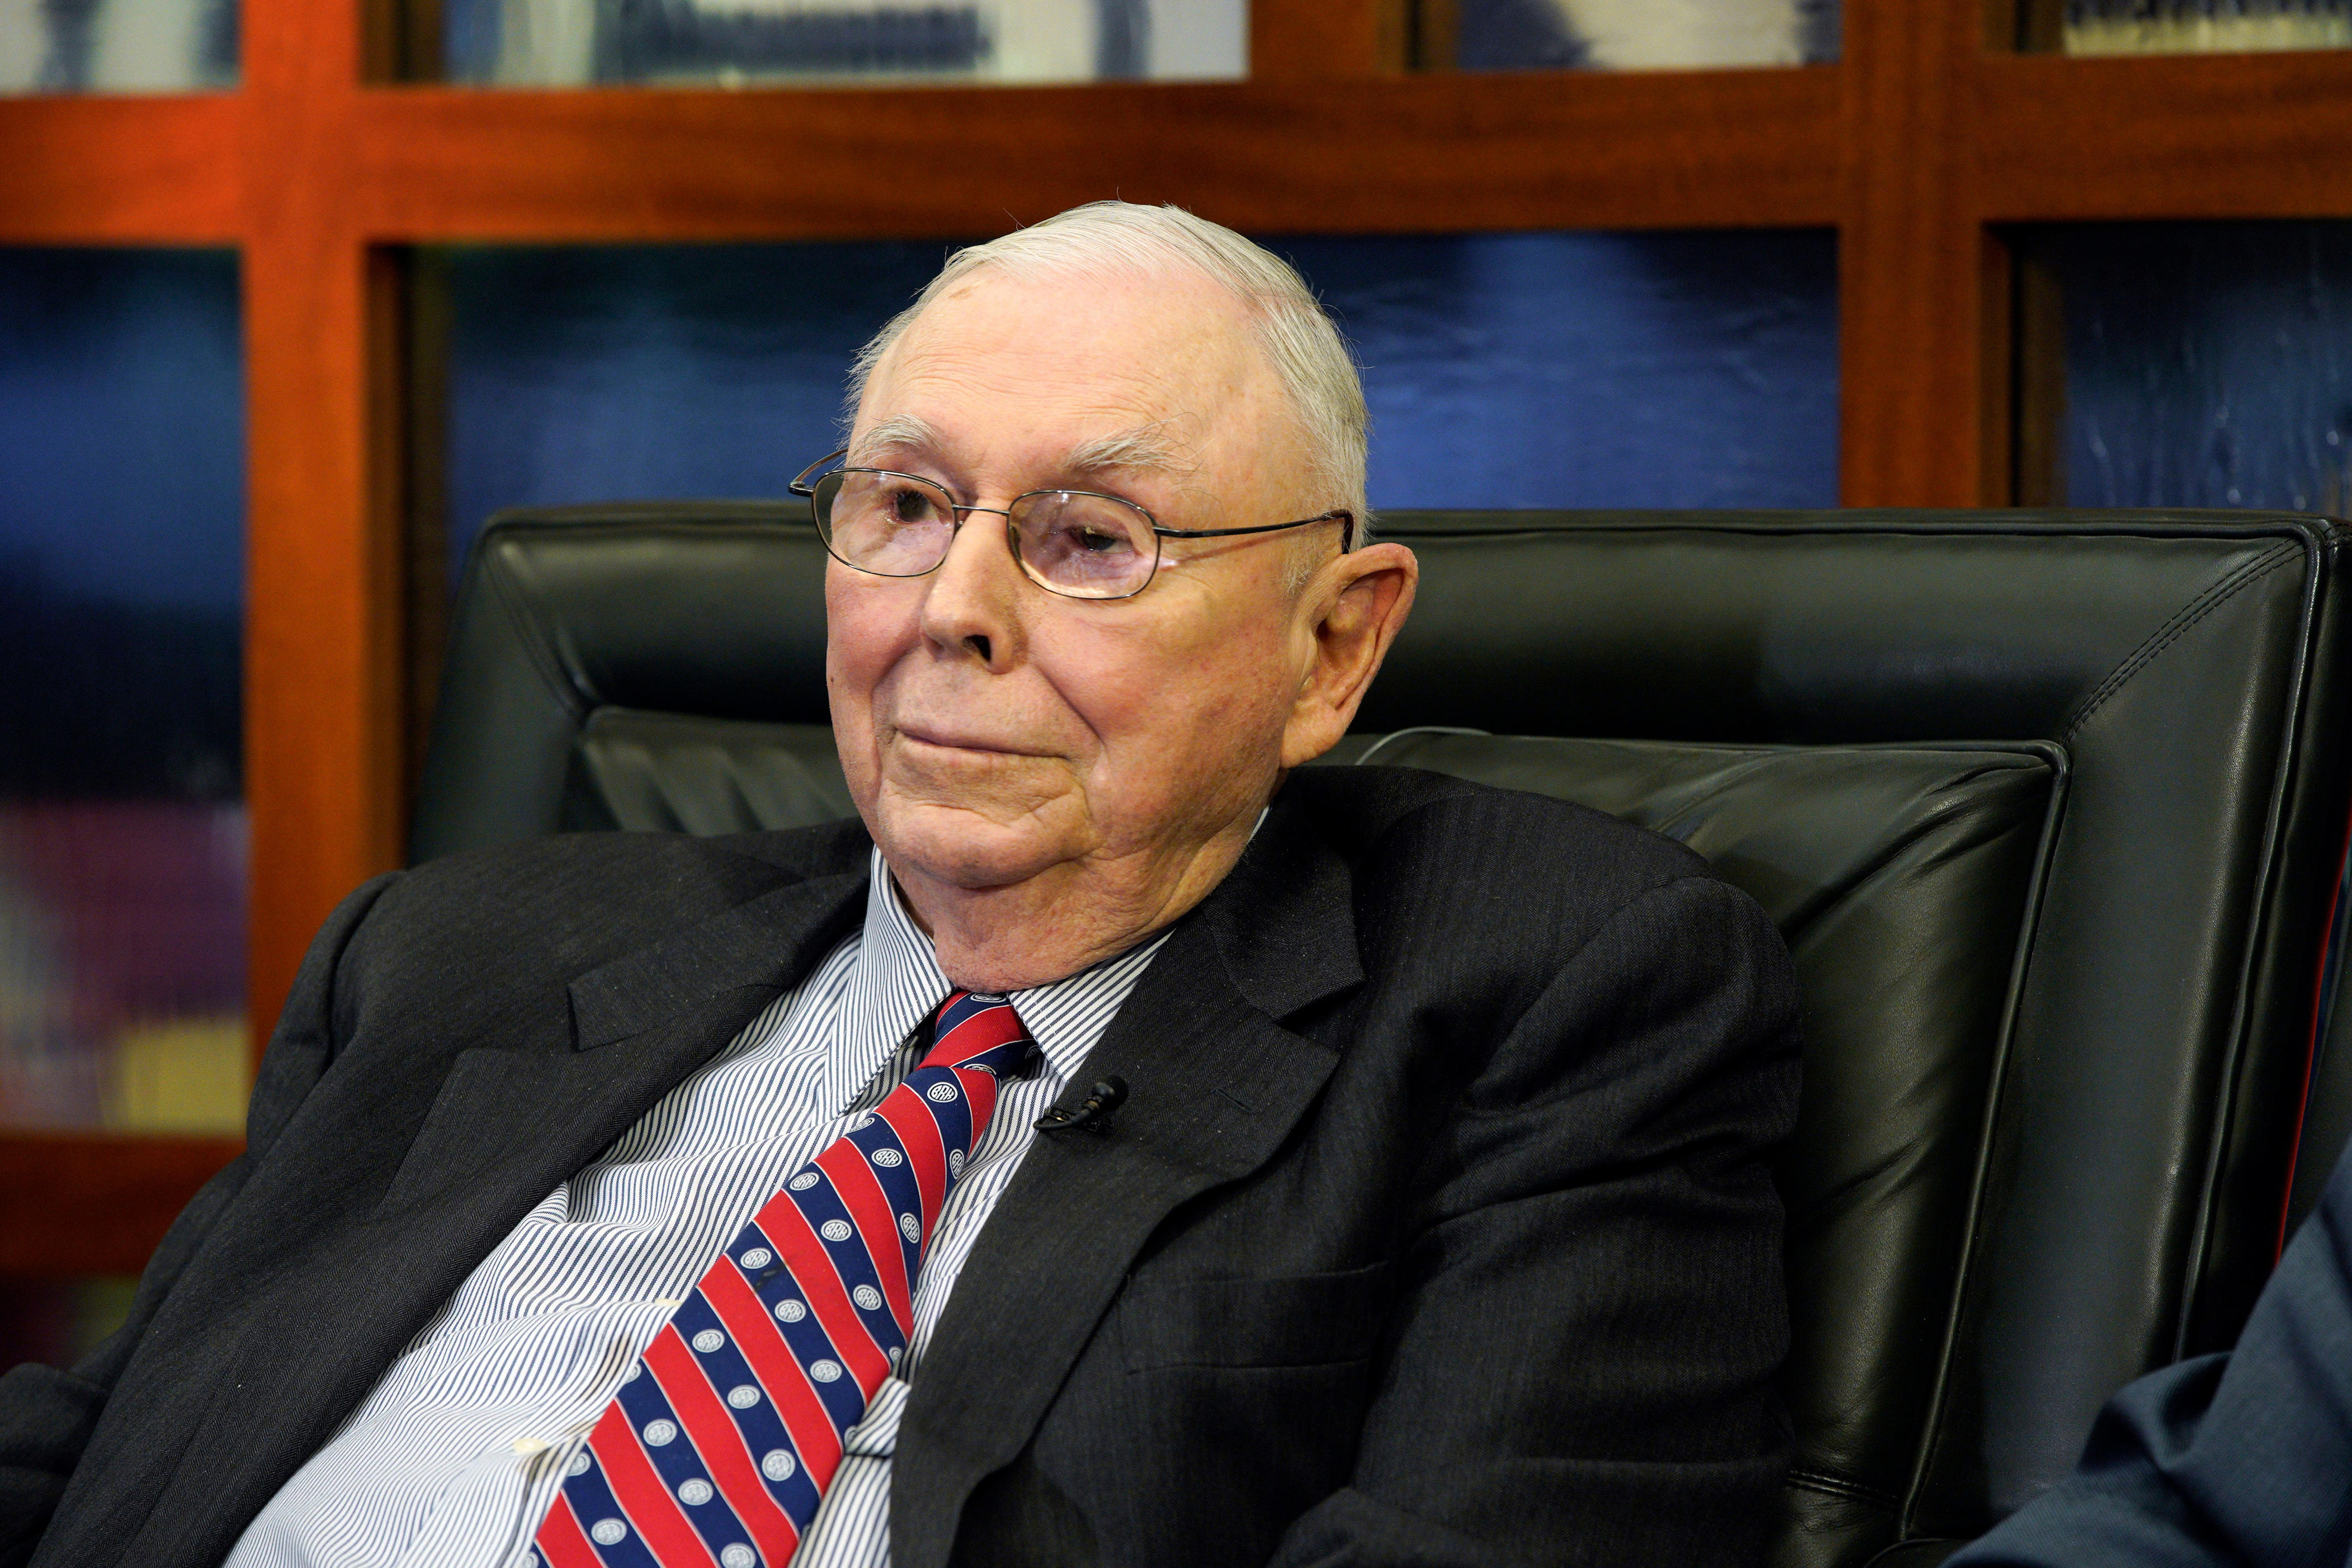 charlie munger made billions for berkshire hathaway, but he made investing mistakes too